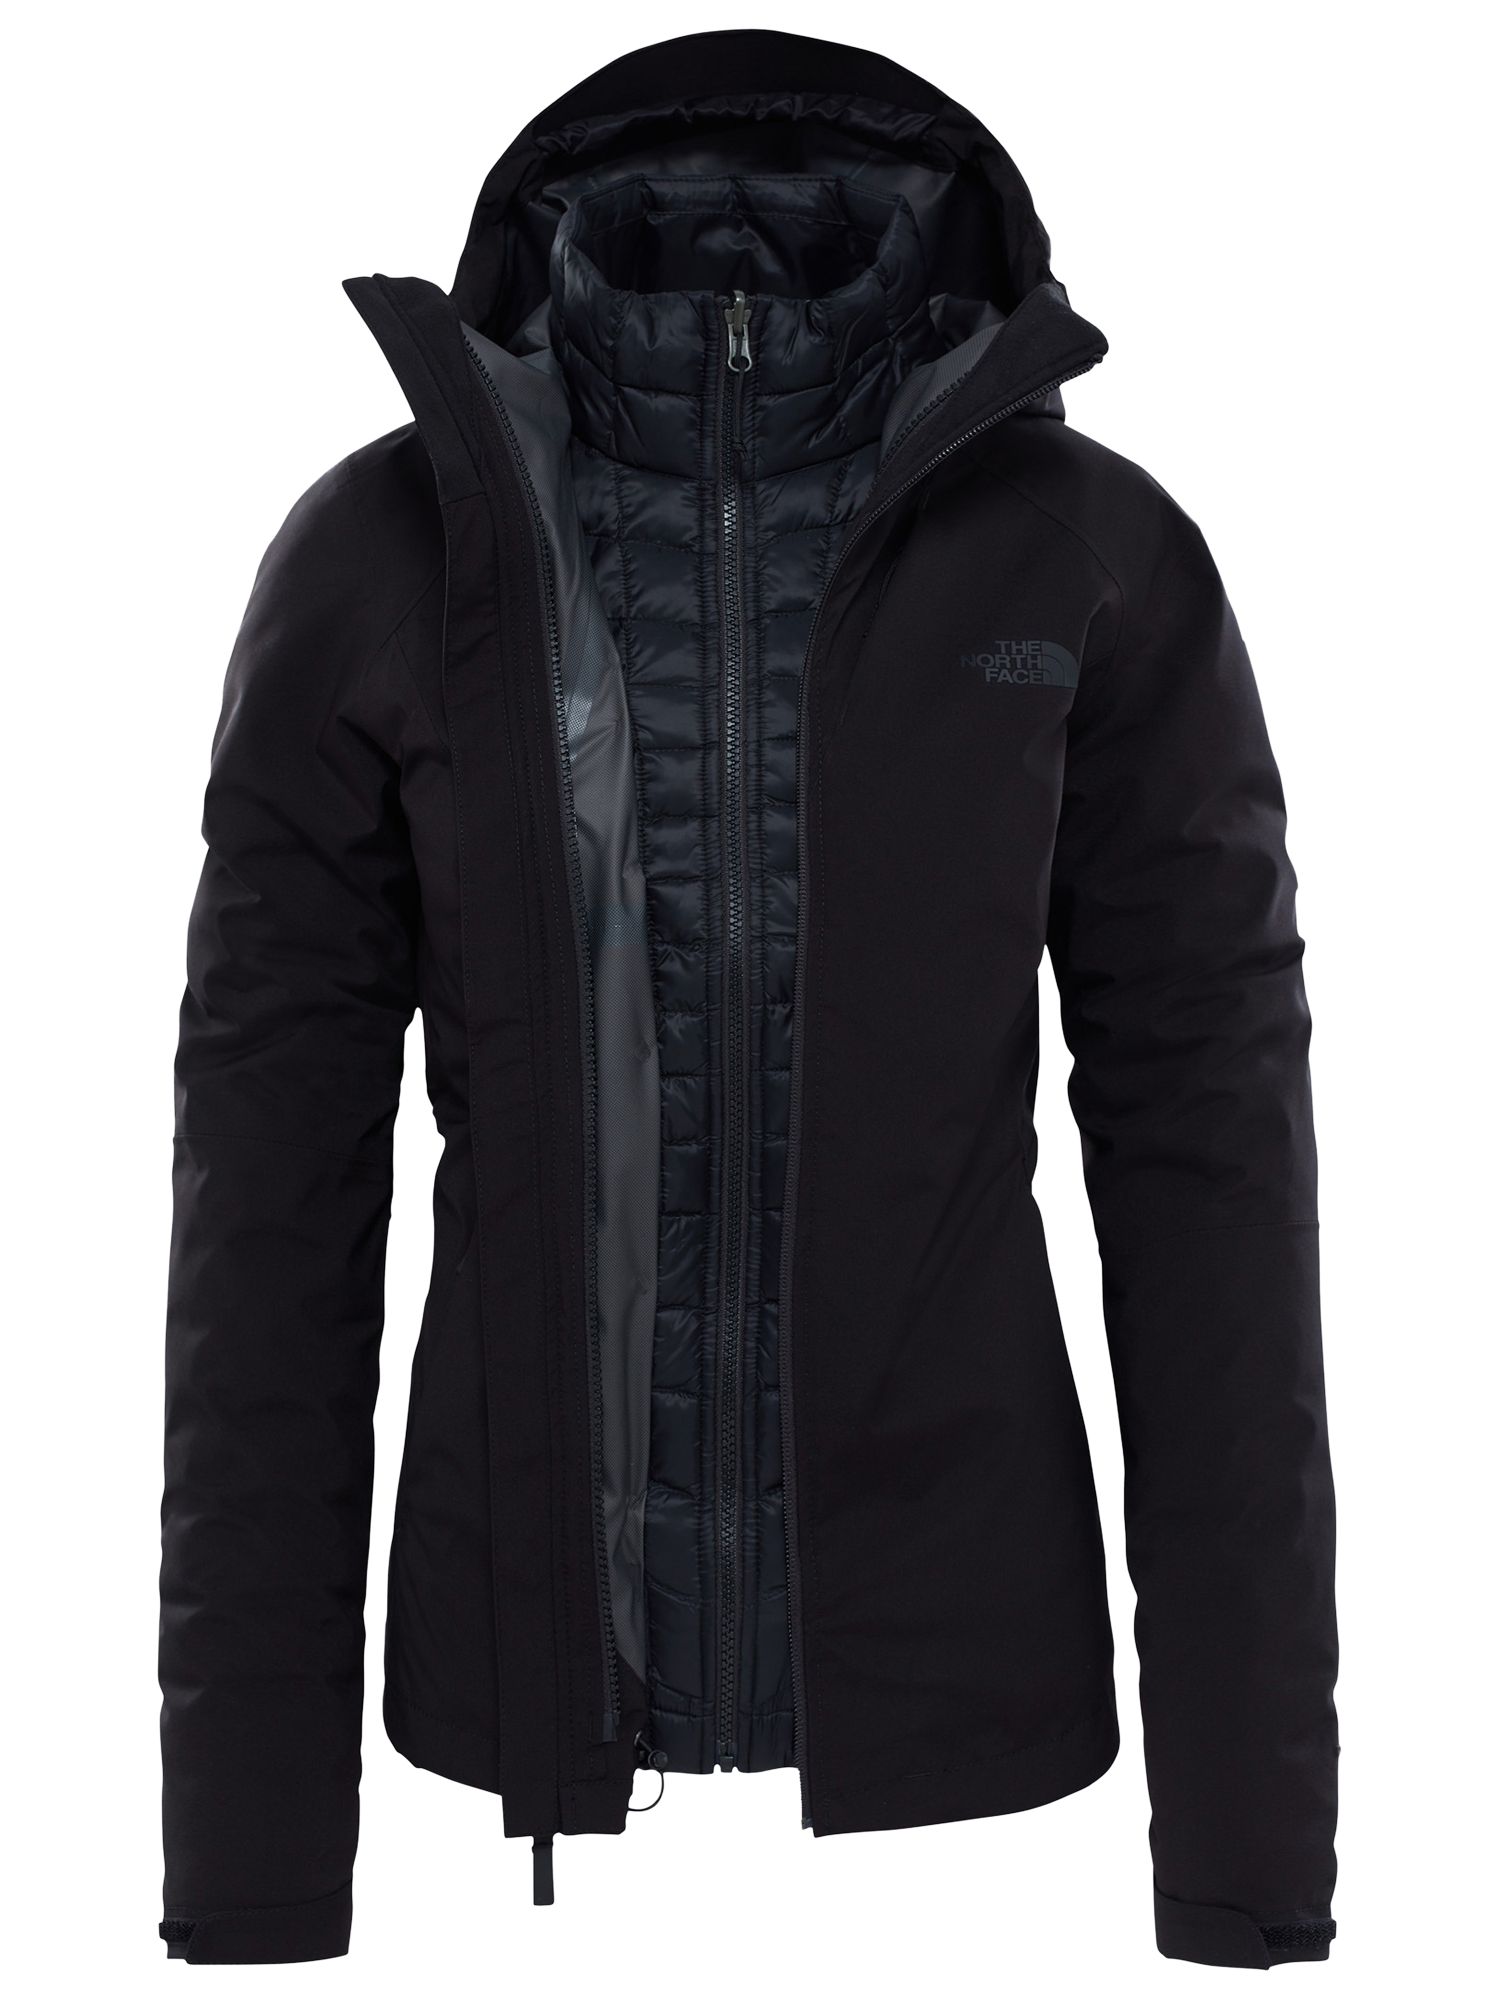 north face women's jacket with hood